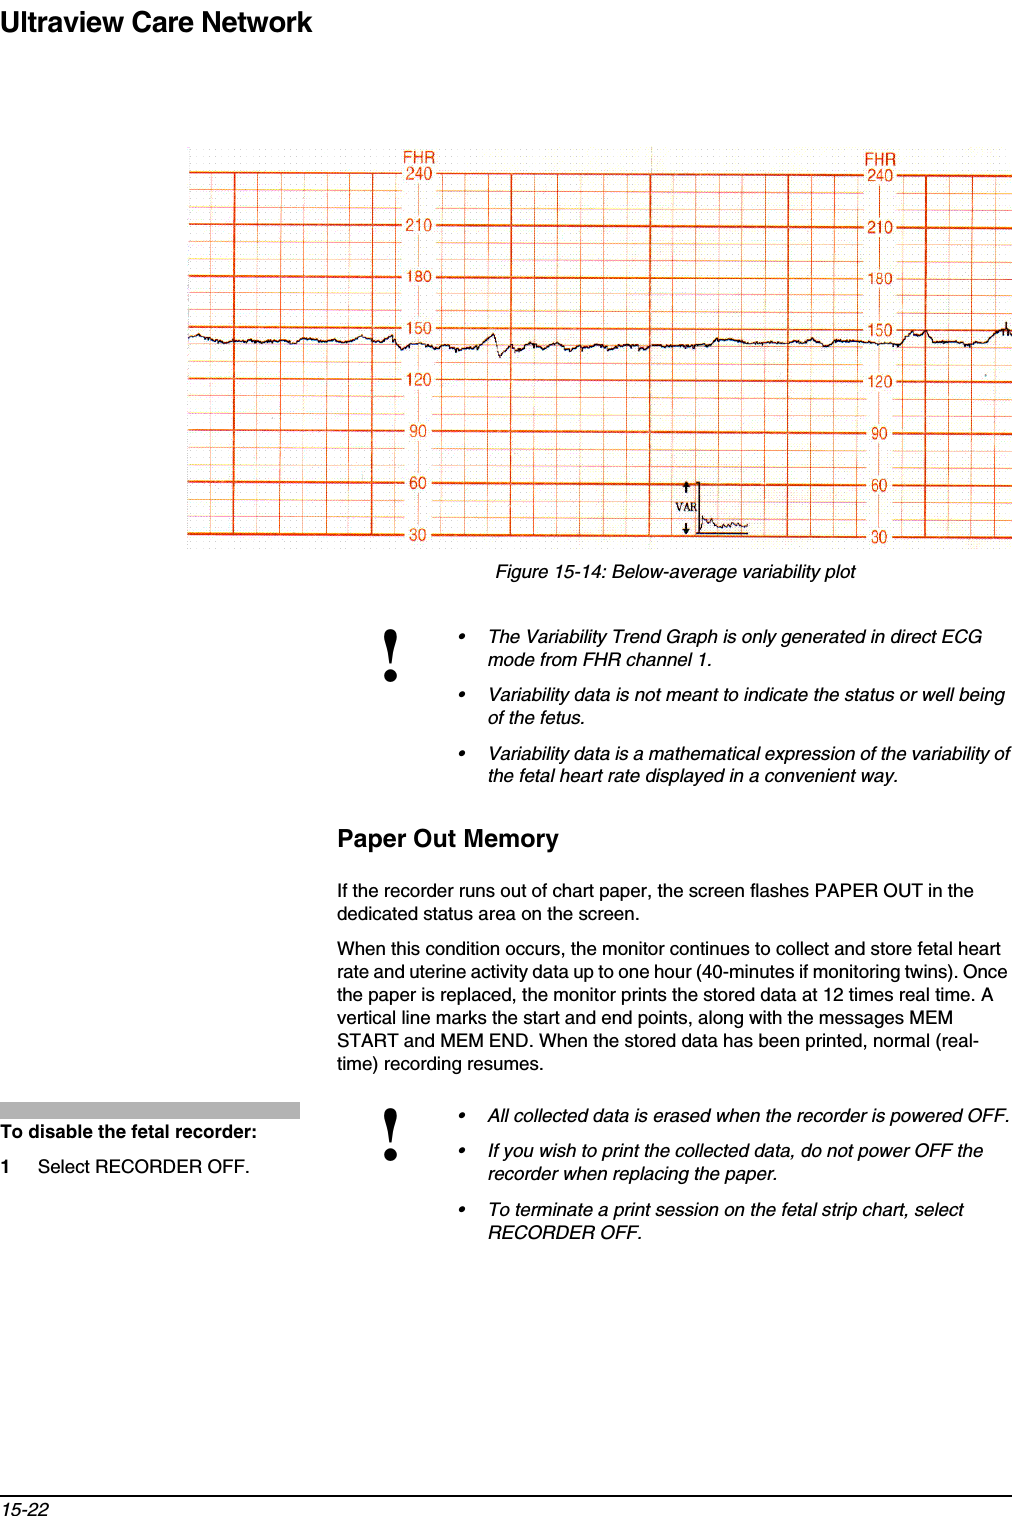 Ultraview Care Network15-22Figure 15-14: Below-average variability plotPaper Out MemoryIf the recorder runs out of chart paper, the screen flashes PAPER OUT in the dedicated status area on the screen.When this condition occurs, the monitor continues to collect and store fetal heart rate and uterine activity data up to one hour (40-minutes if monitoring twins). Once the paper is replaced, the monitor prints the stored data at 12 times real time. A vertical line marks the start and end points, along with the messages MEM START and MEM END. When the stored data has been printed, normal (real-time) recording resumes.!• The Variability Trend Graph is only generated in direct ECG mode from FHR channel 1.• Variability data is not meant to indicate the status or well being of the fetus.• Variability data is a mathematical expression of the variability of the fetal heart rate displayed in a convenient way. !• All collected data is erased when the recorder is powered OFF.• If you wish to print the collected data, do not power OFF the recorder when replacing the paper.• To terminate a print session on the fetal strip chart, select RECORDER OFF.To disable the fetal recorder:1Select RECORDER OFF.